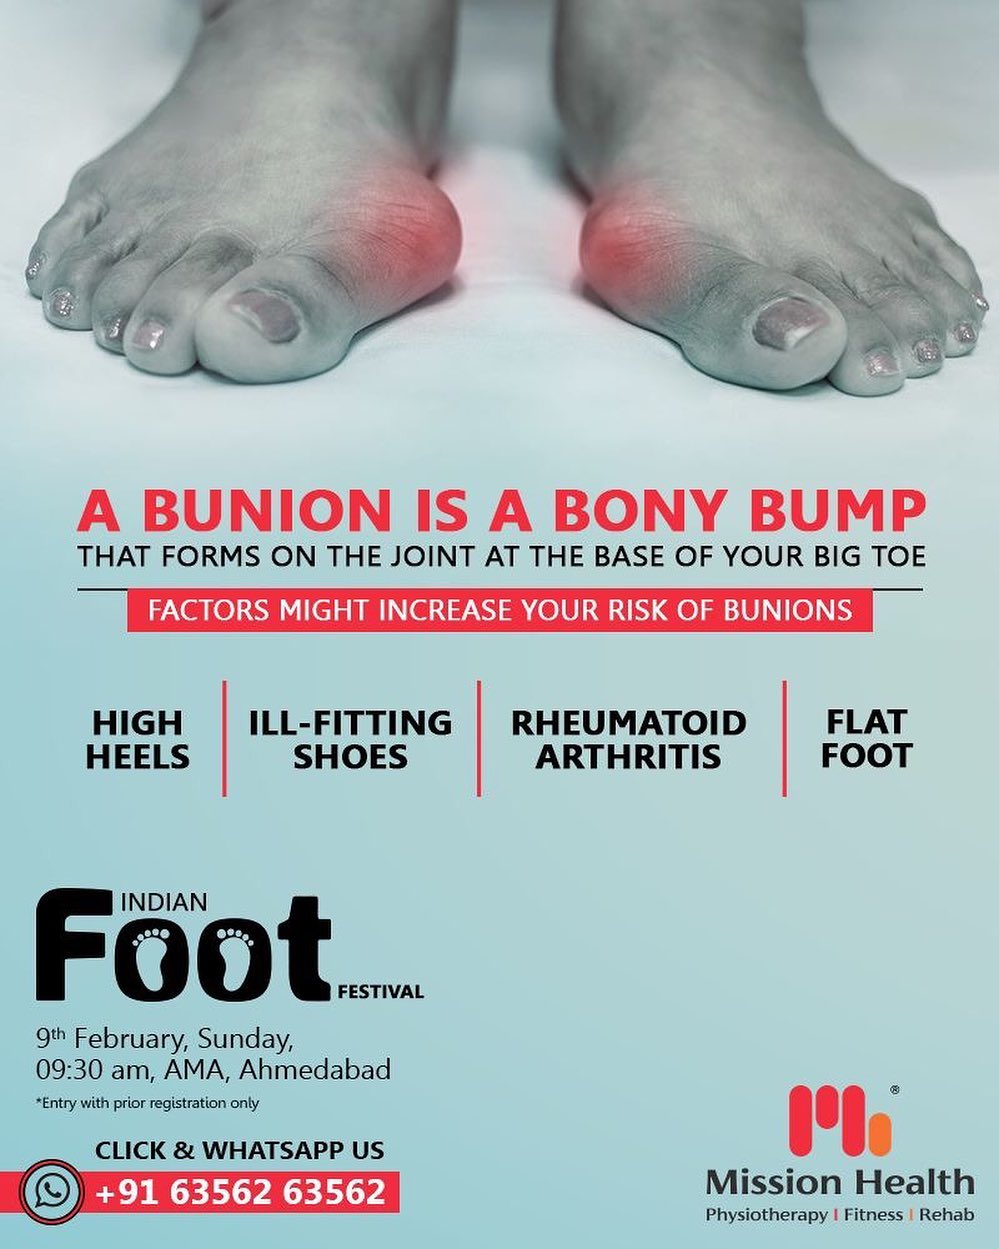 Wearing tight, narrow shoes might cause bunions or make them worse. Bunions can also develop as a result of the shape of your foot, a foot deformity or a medical condition, such as arthritis.

Call: +916356263562
Visit: www.missionhealth.co.in

#IndianFootFestival #ComingSoon #FootClinic #footpain #footcare #foothealth #heelpain #anklepain #flatfeet #painrelief #healthyfeet #happyfeet #MissionHealth #MissionHealthIndia #MovementIsLife